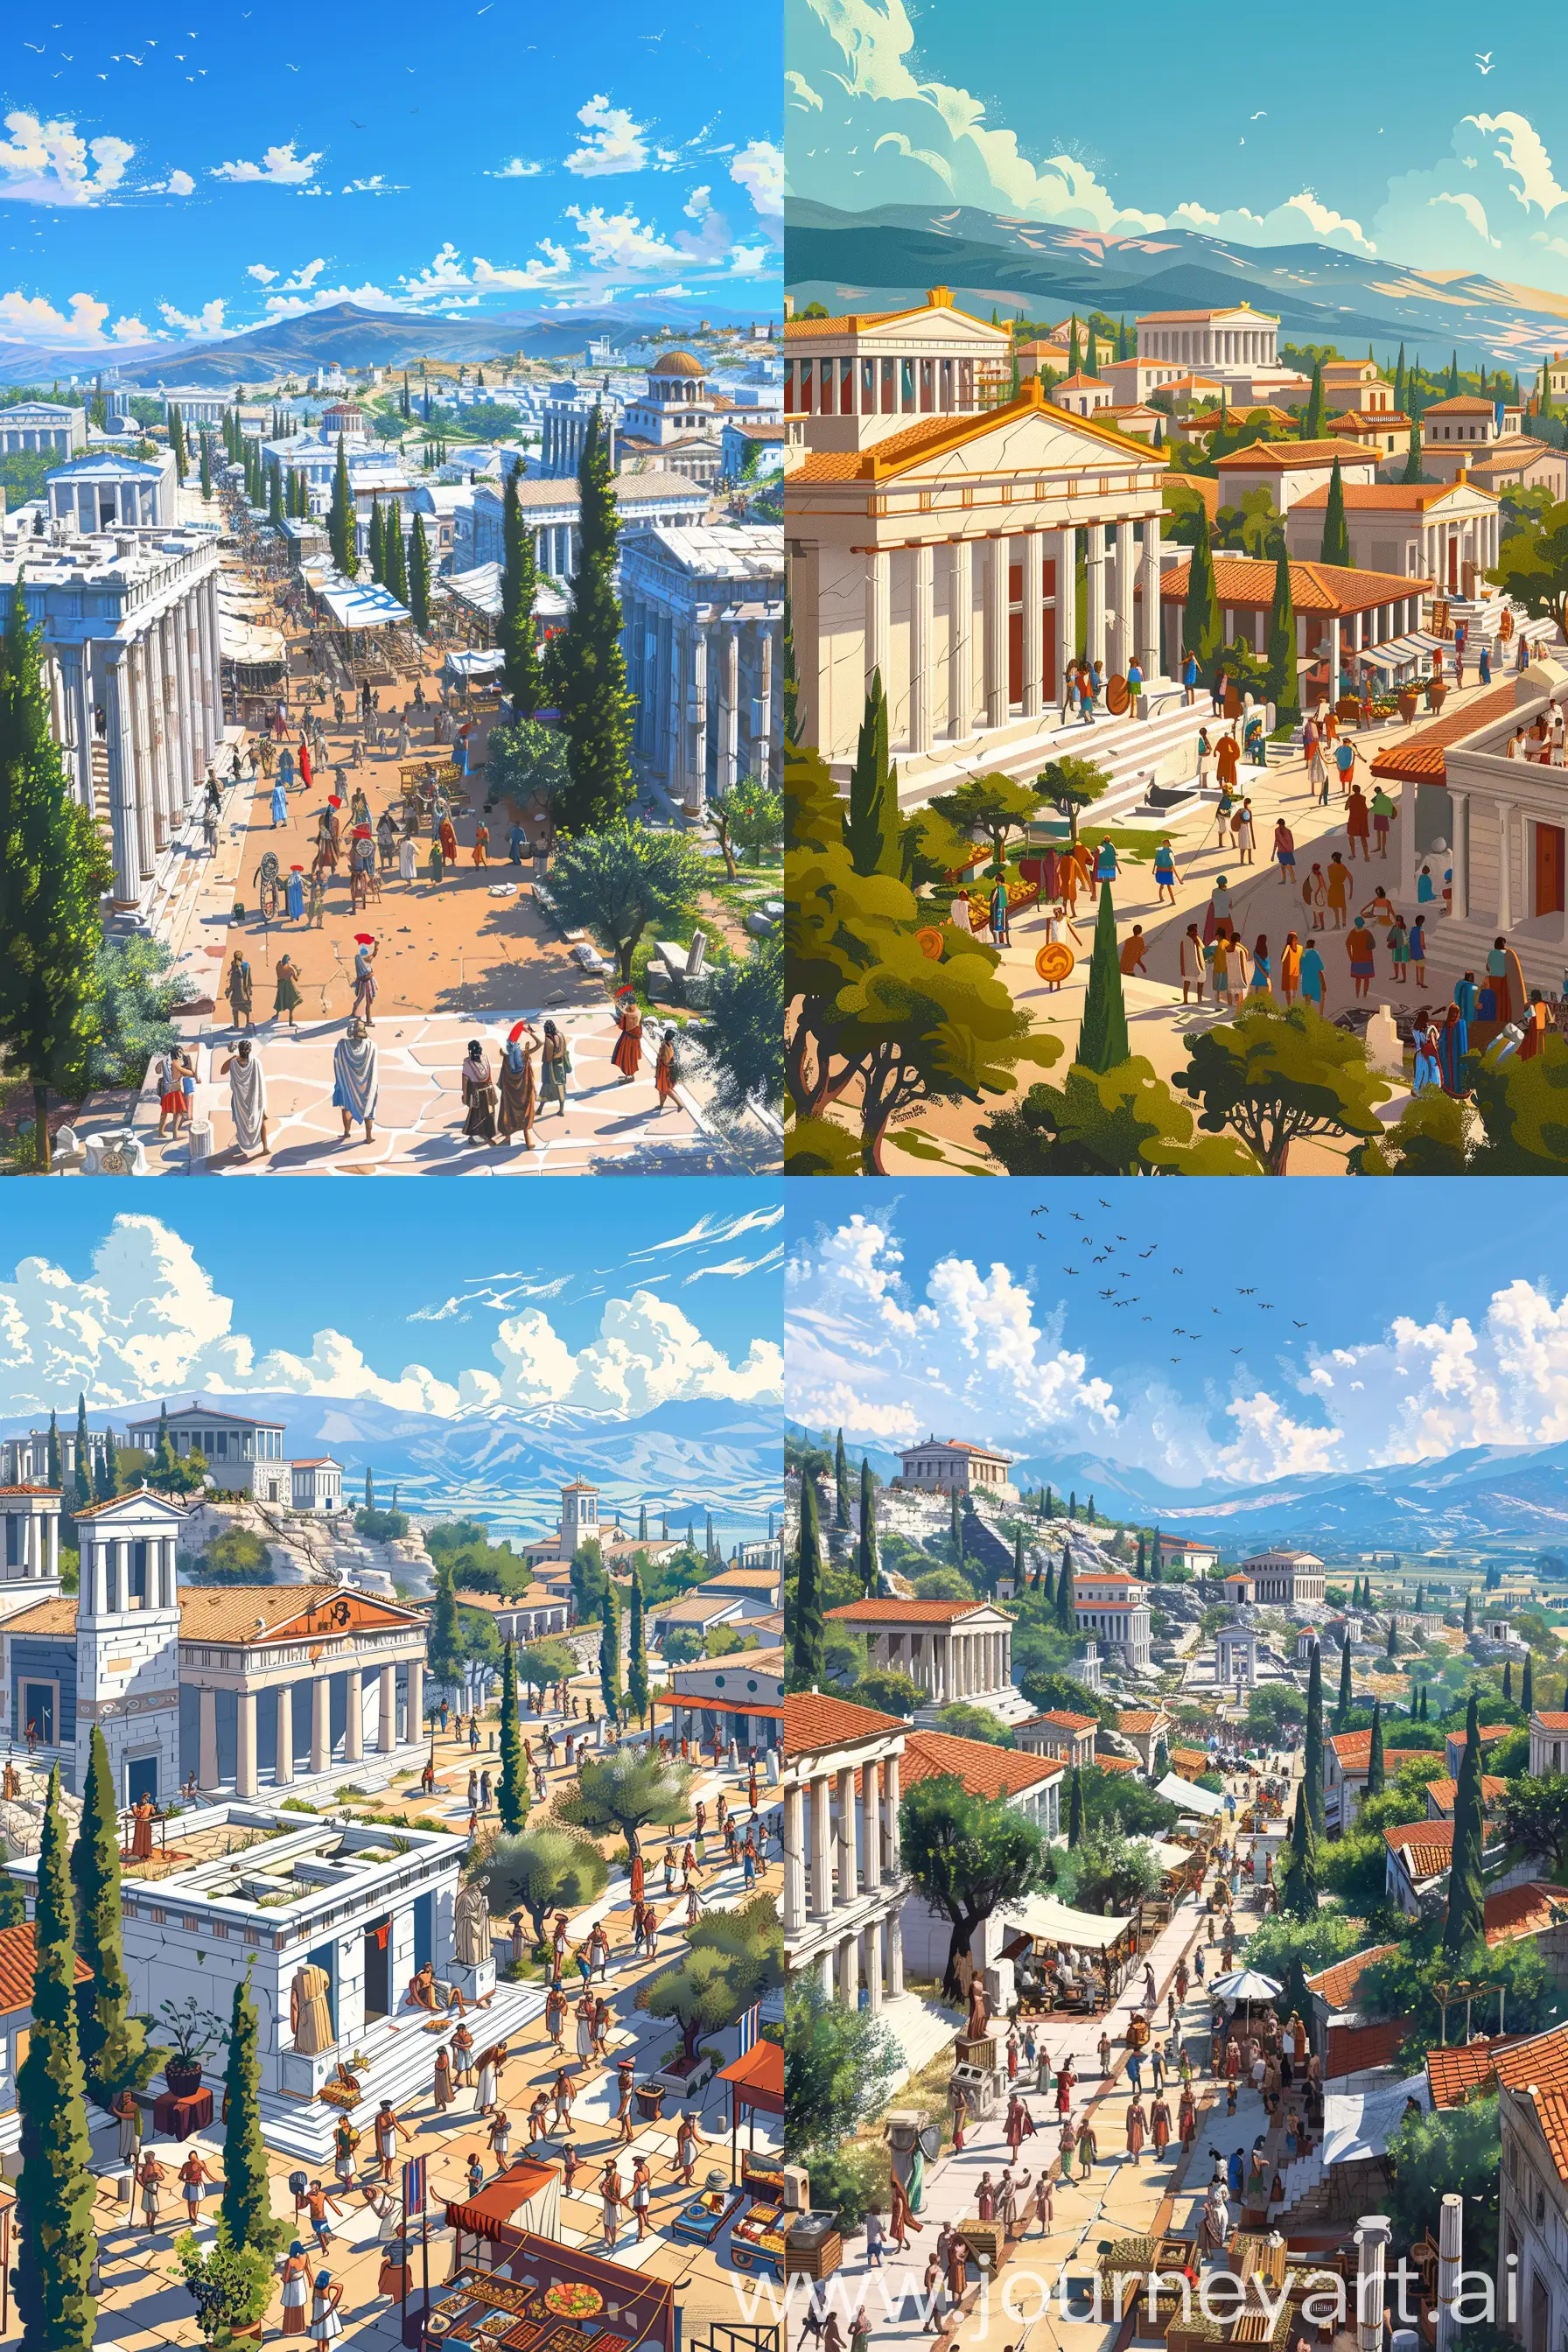 Vibrant-Life-in-Ancient-Greek-City-Marble-Structures-Togas-and-Olive-Markets